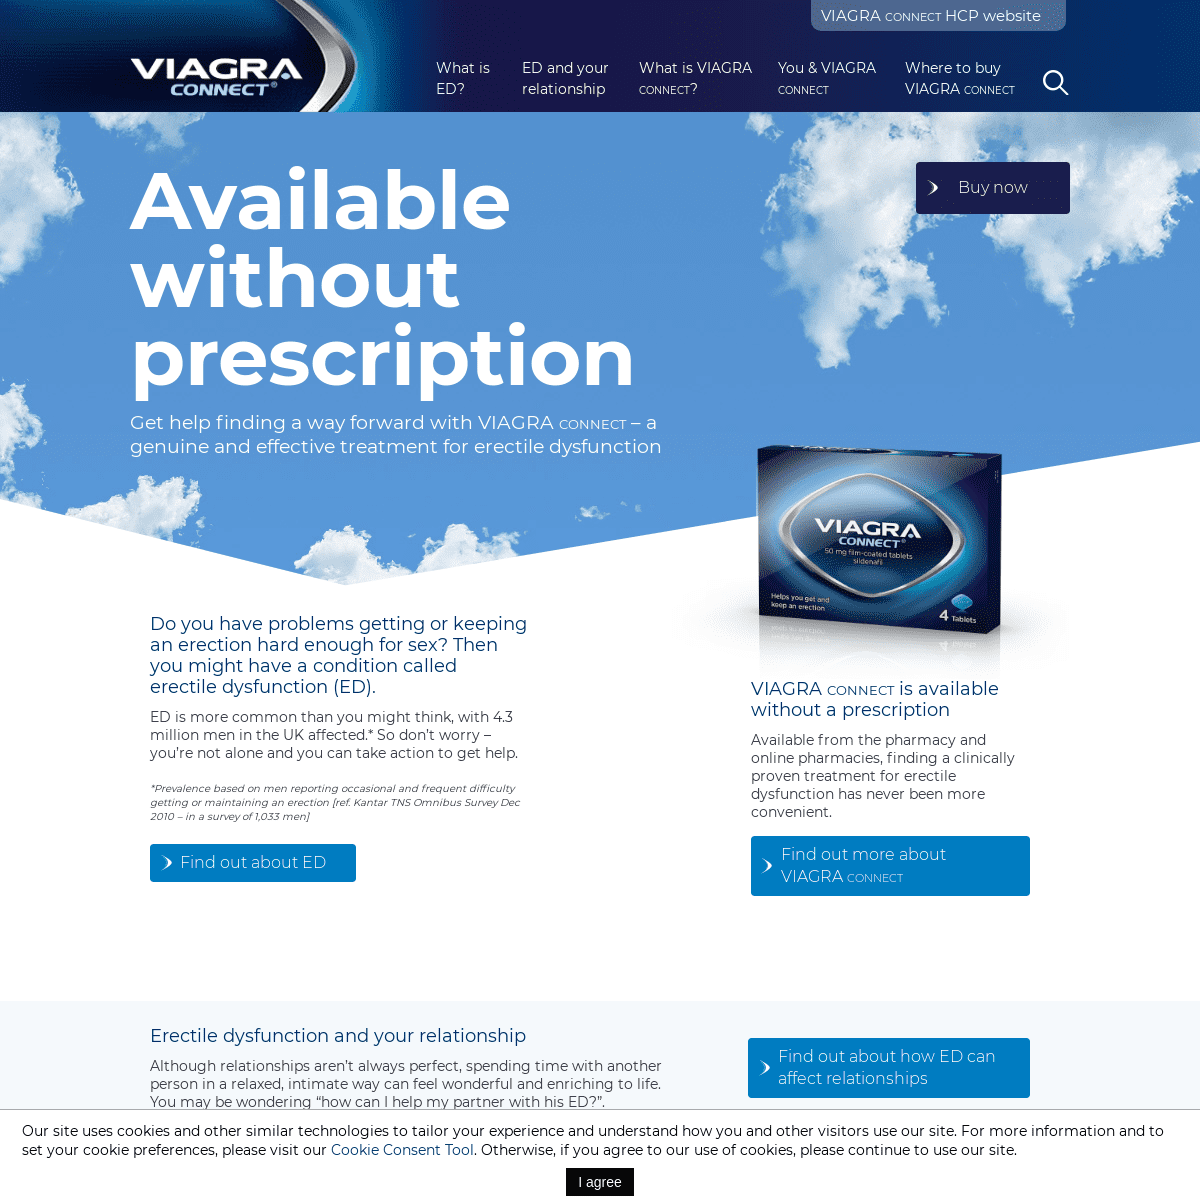 A complete backup of viagraconnect.co.uk